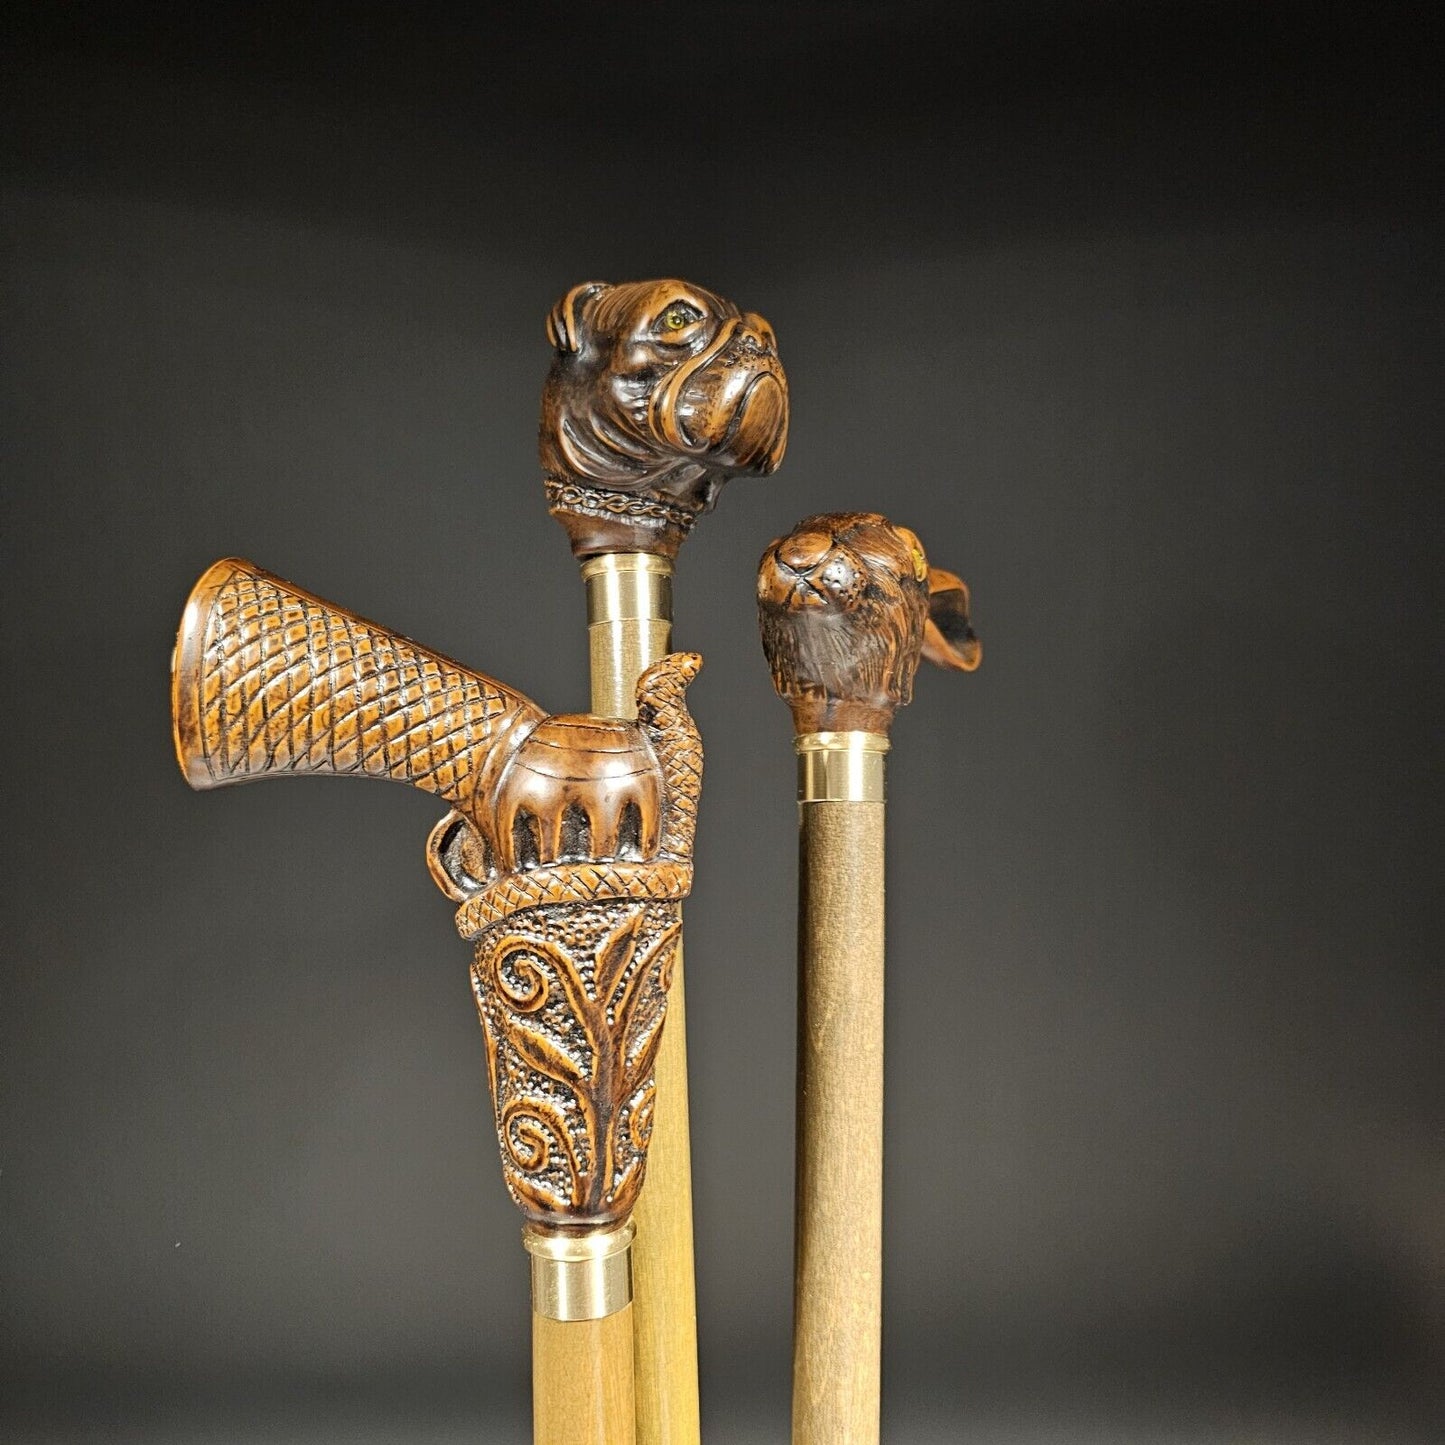 Lot of 3-36" Antique Style Figural Walking Stick Cane